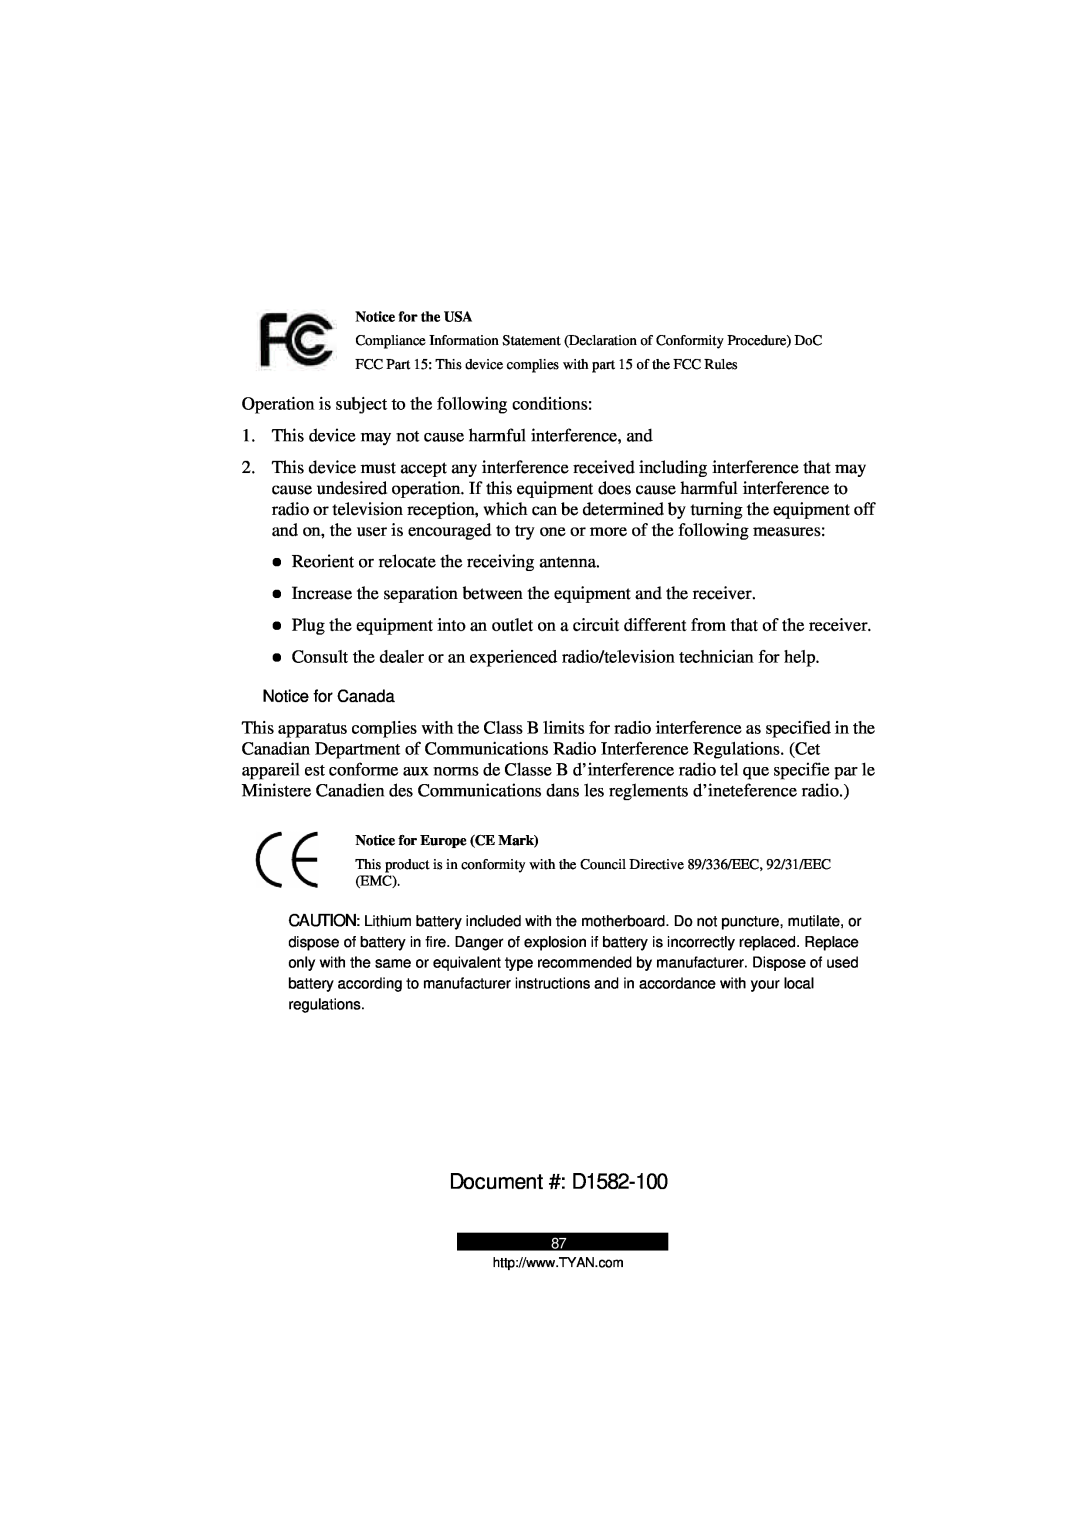 Tyan Computer B5103G12S2, Transport GS12 manual Notice for Canada, Document # D1582-100 